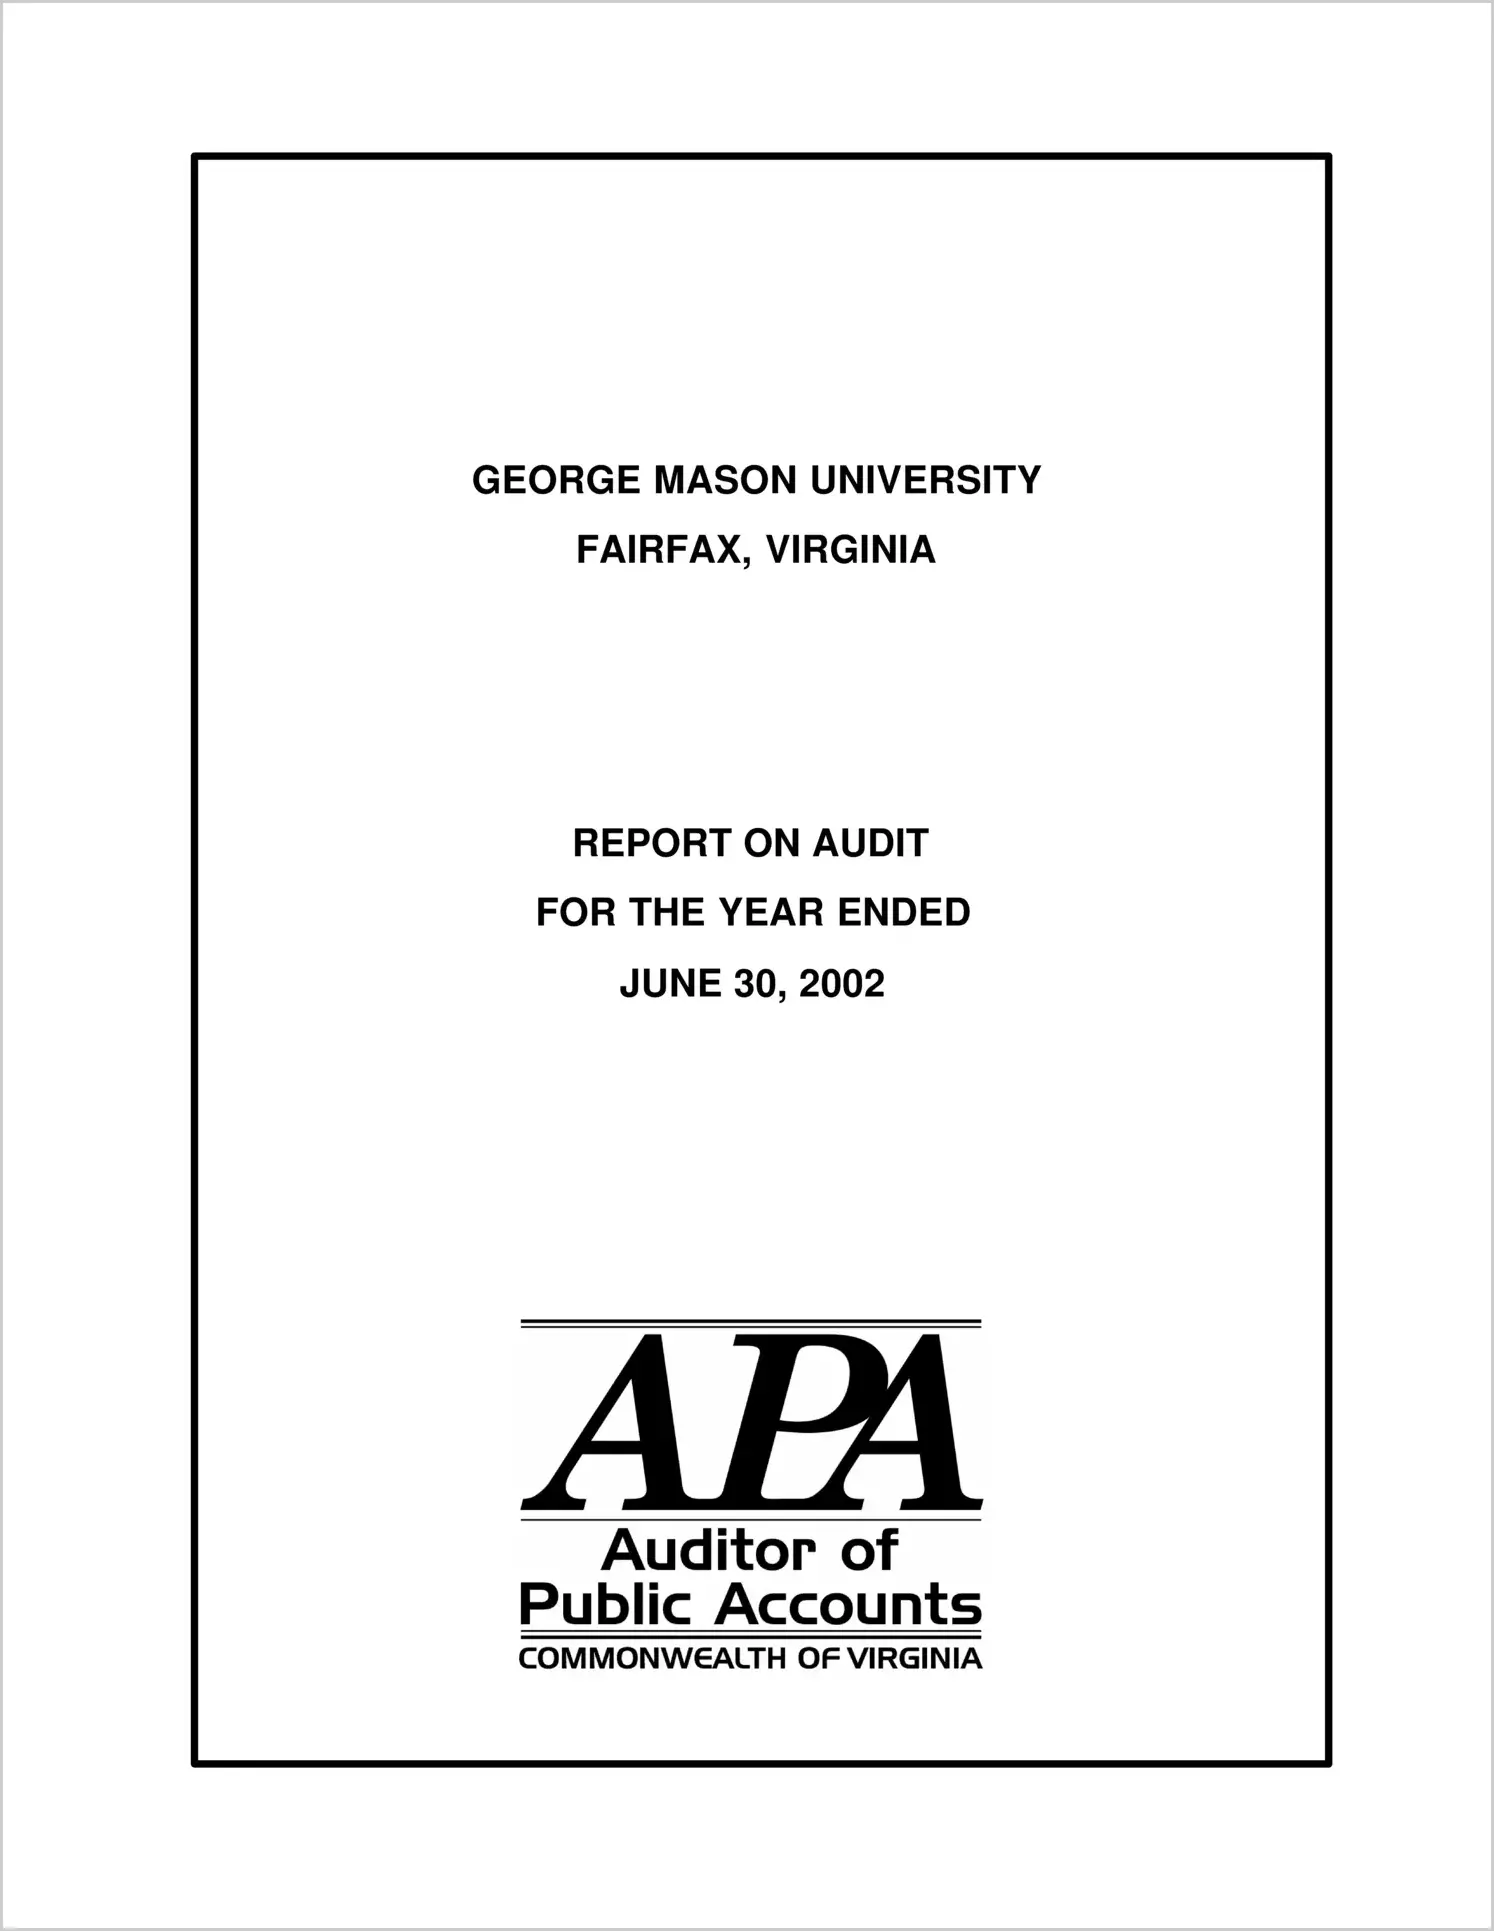 George Mason University for the year ended June 30, 2002